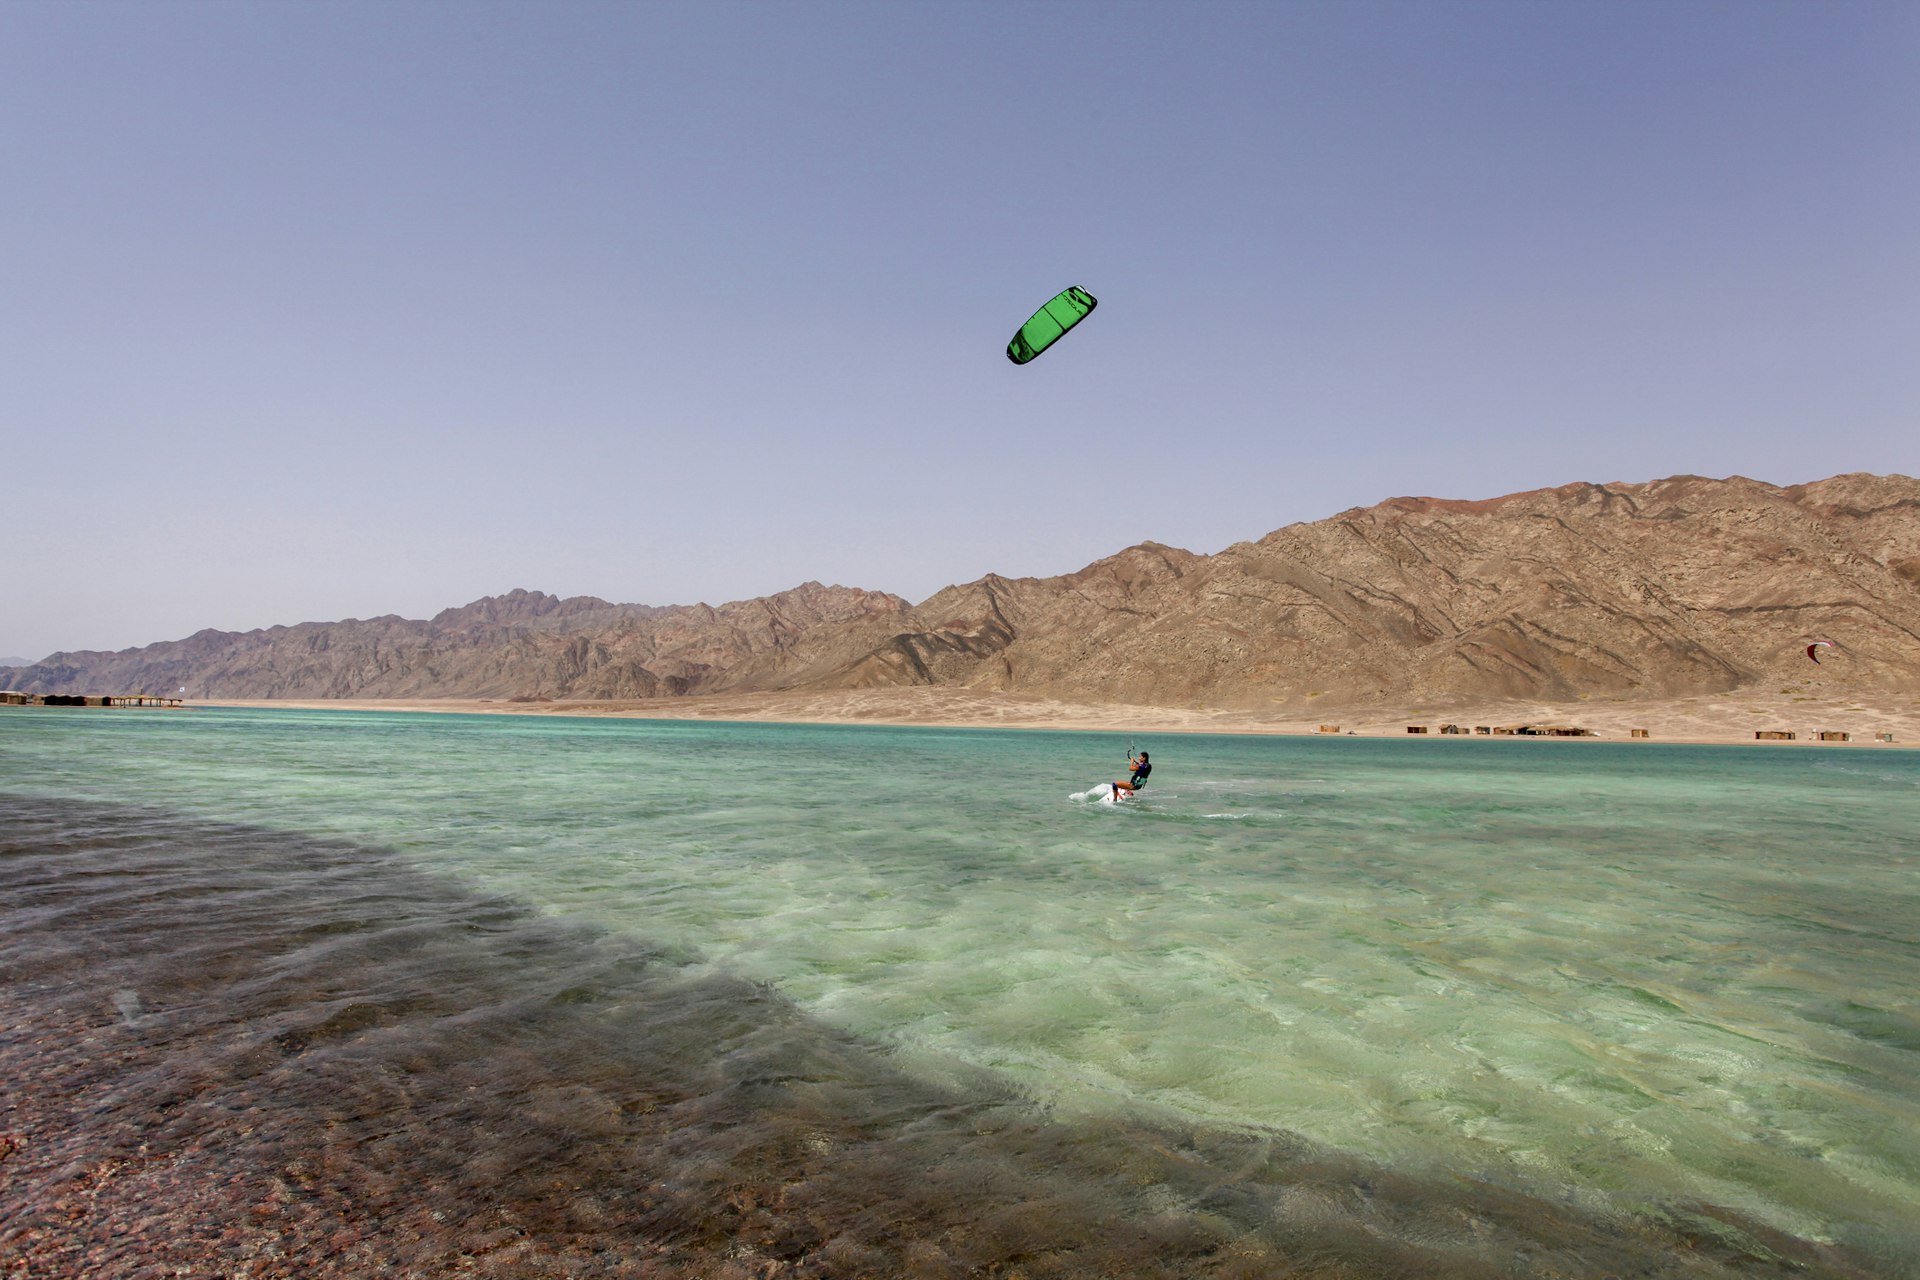 A kite surfer speeds along with their kite high above them in the Blue Lagoon, Egypt